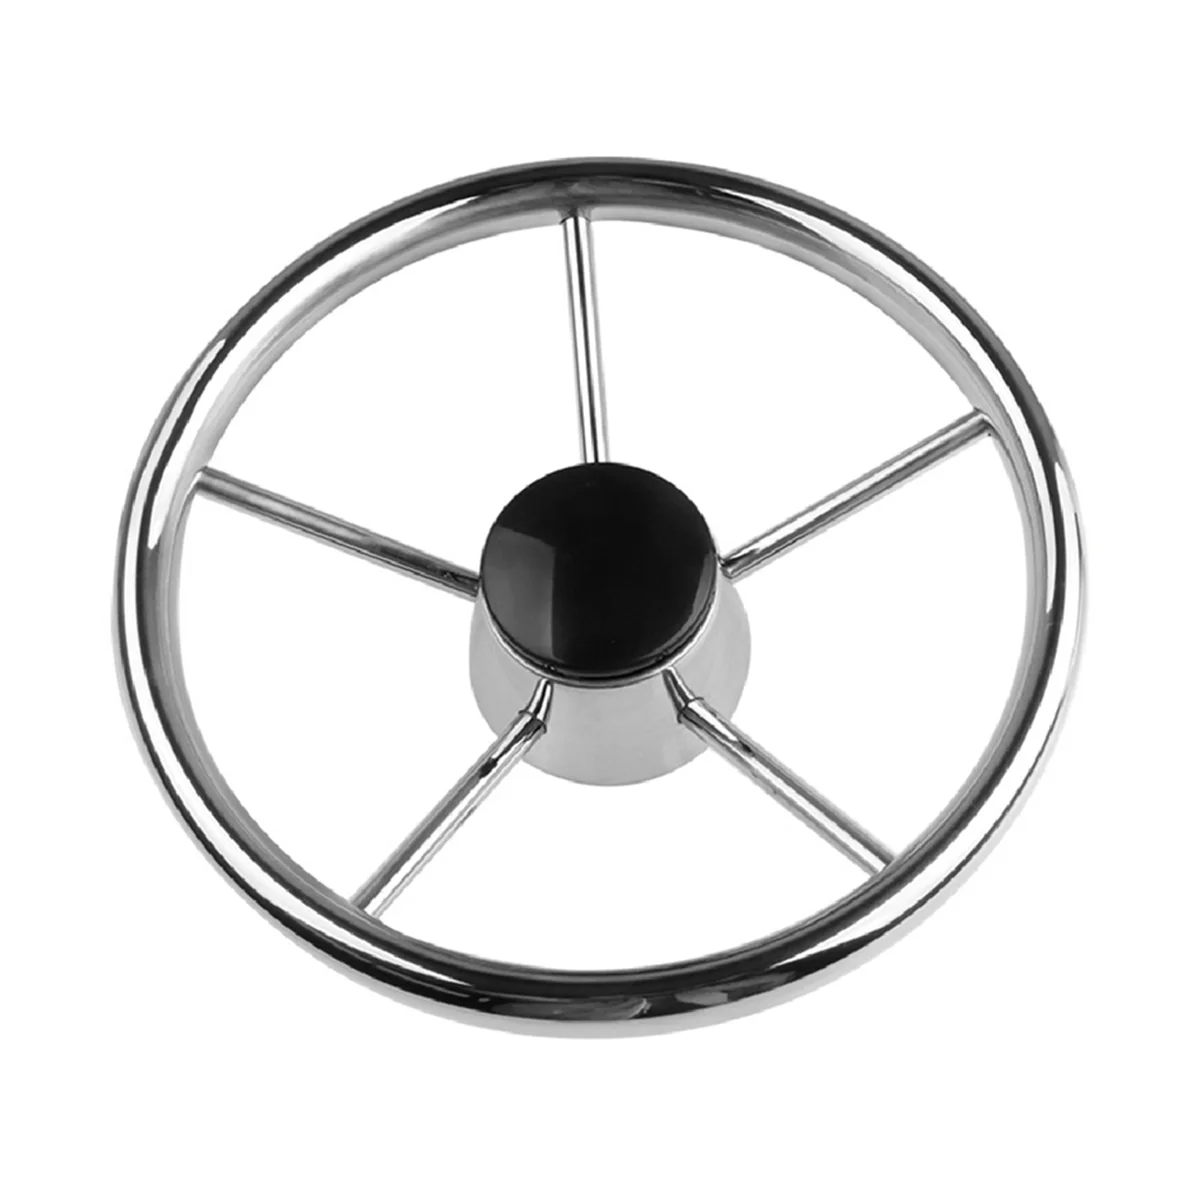 

Boat Steering Wheel Stainless Steel 5 Spoke 11Inch for Most Marine Yacht Boat Boating Equipment Accessories